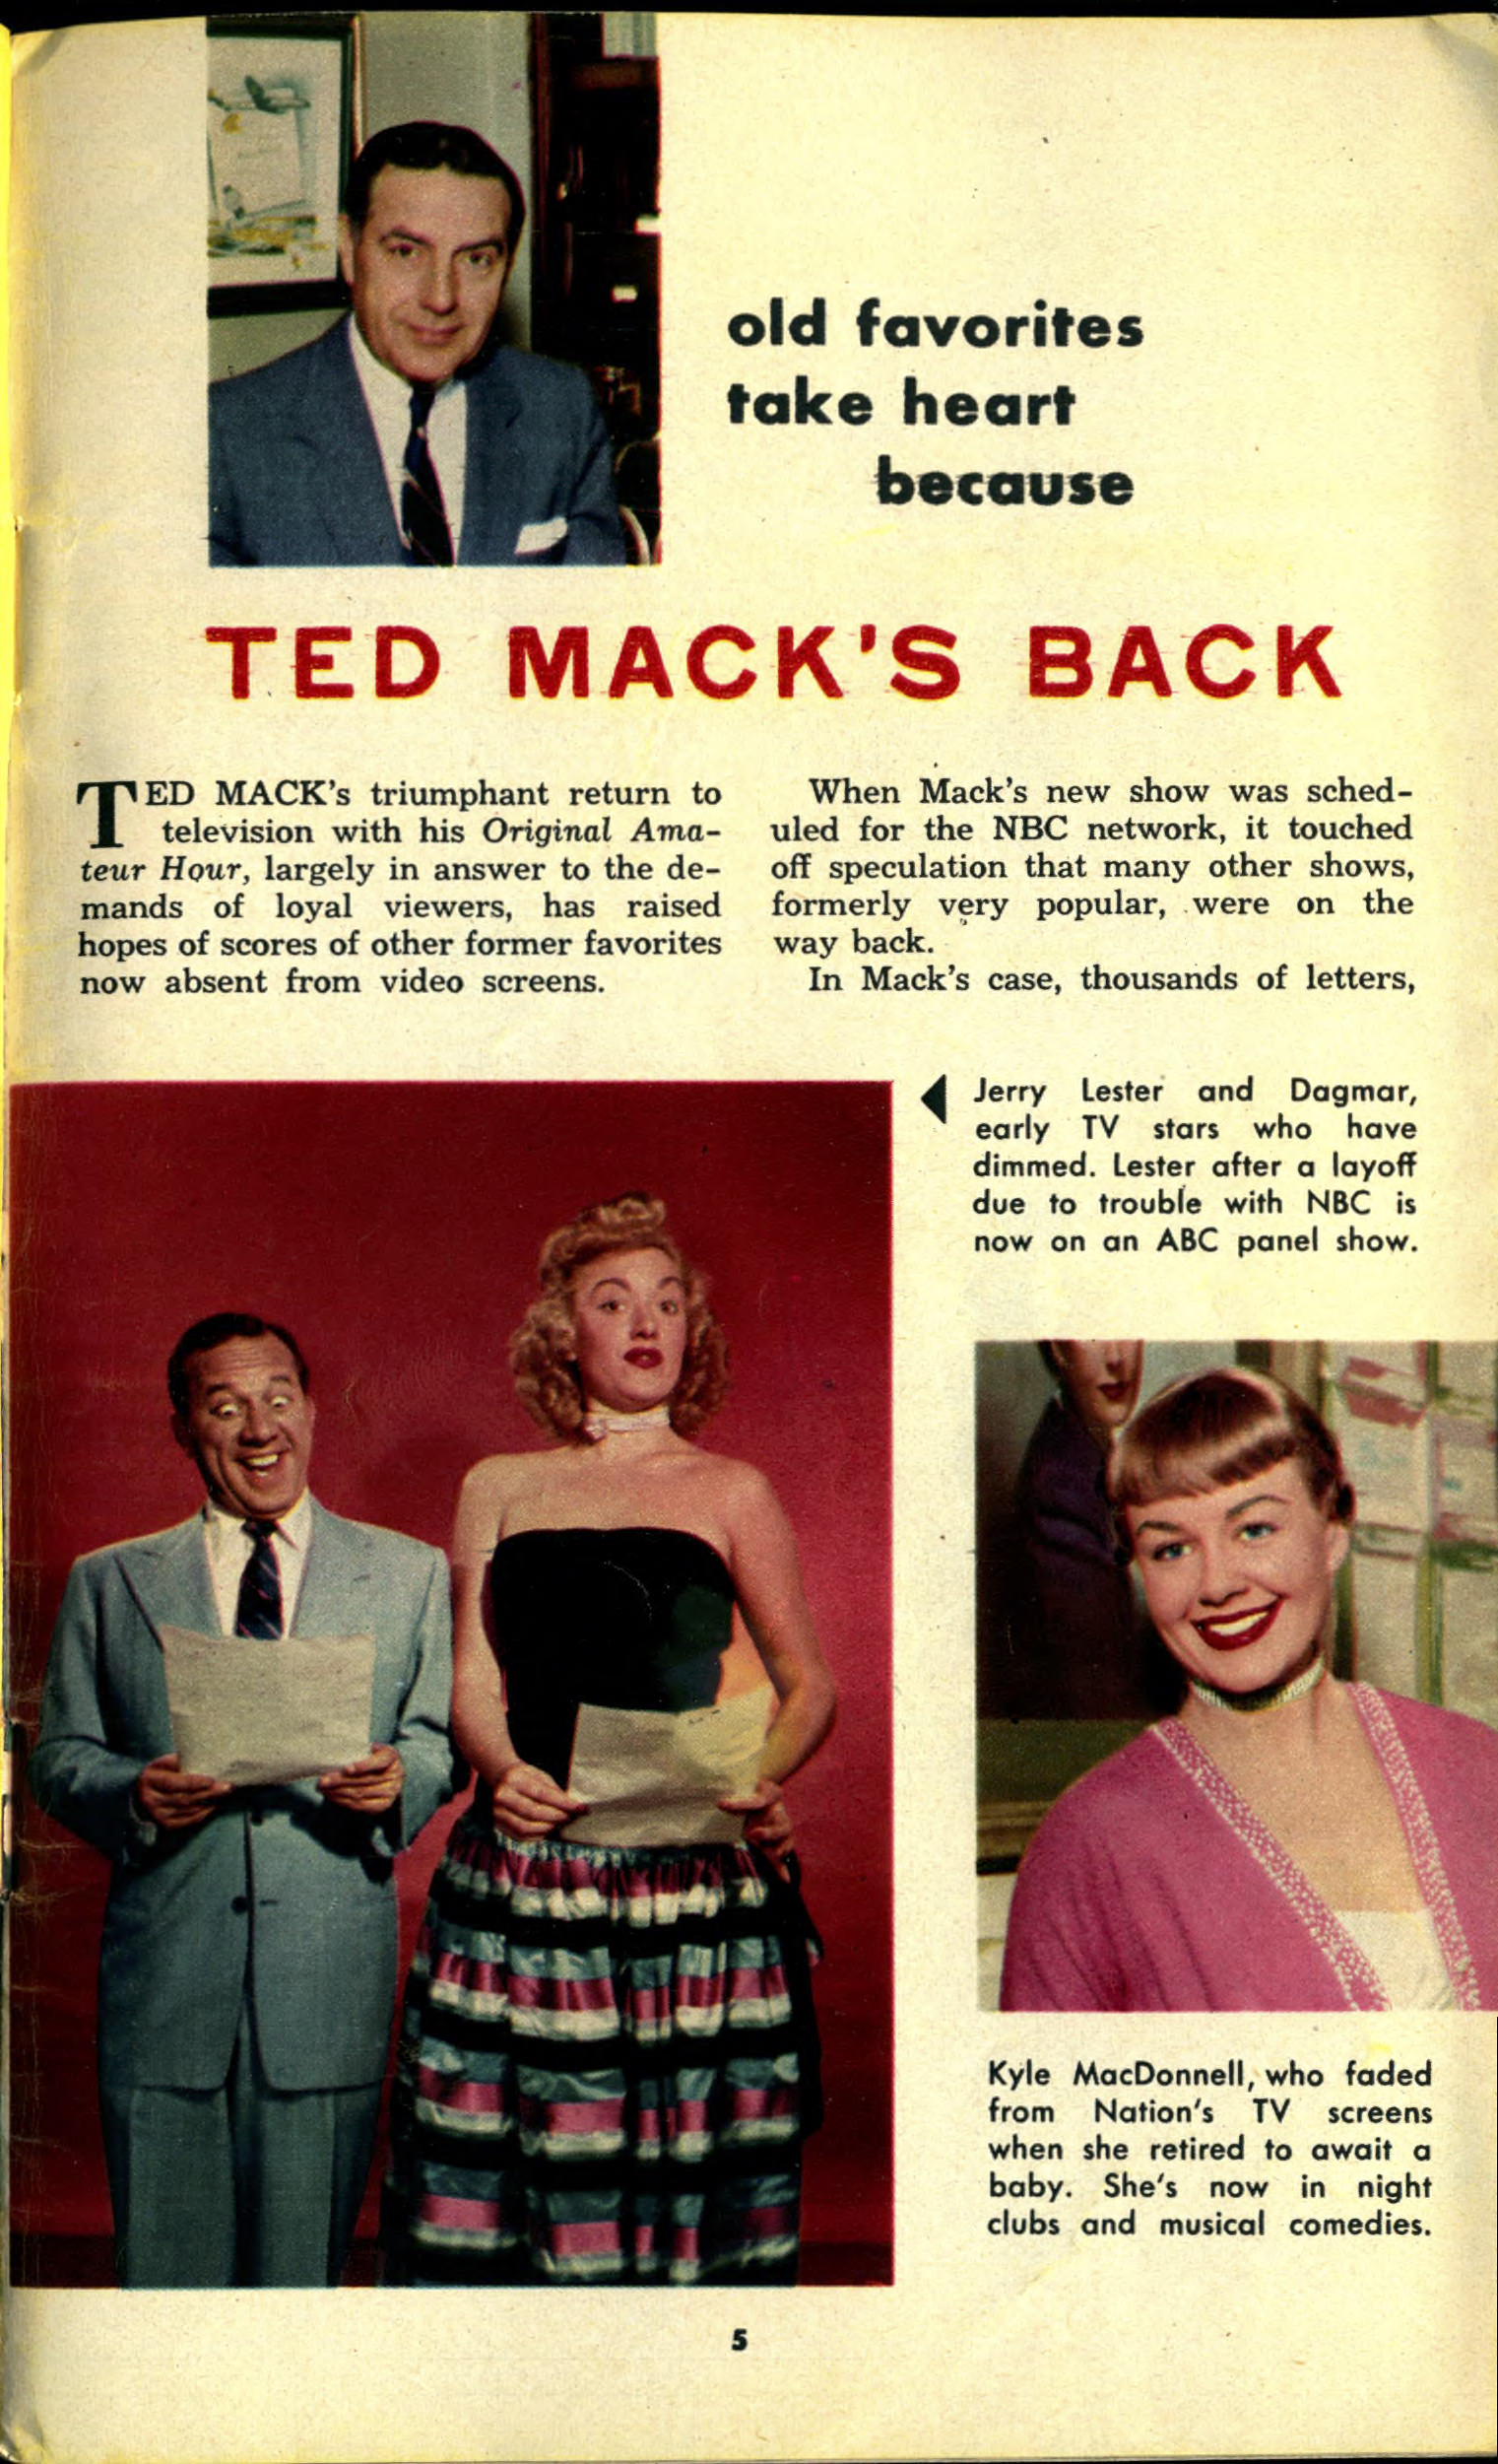 Page 5 from the 1-7 May, 1953 TV Guide issue.